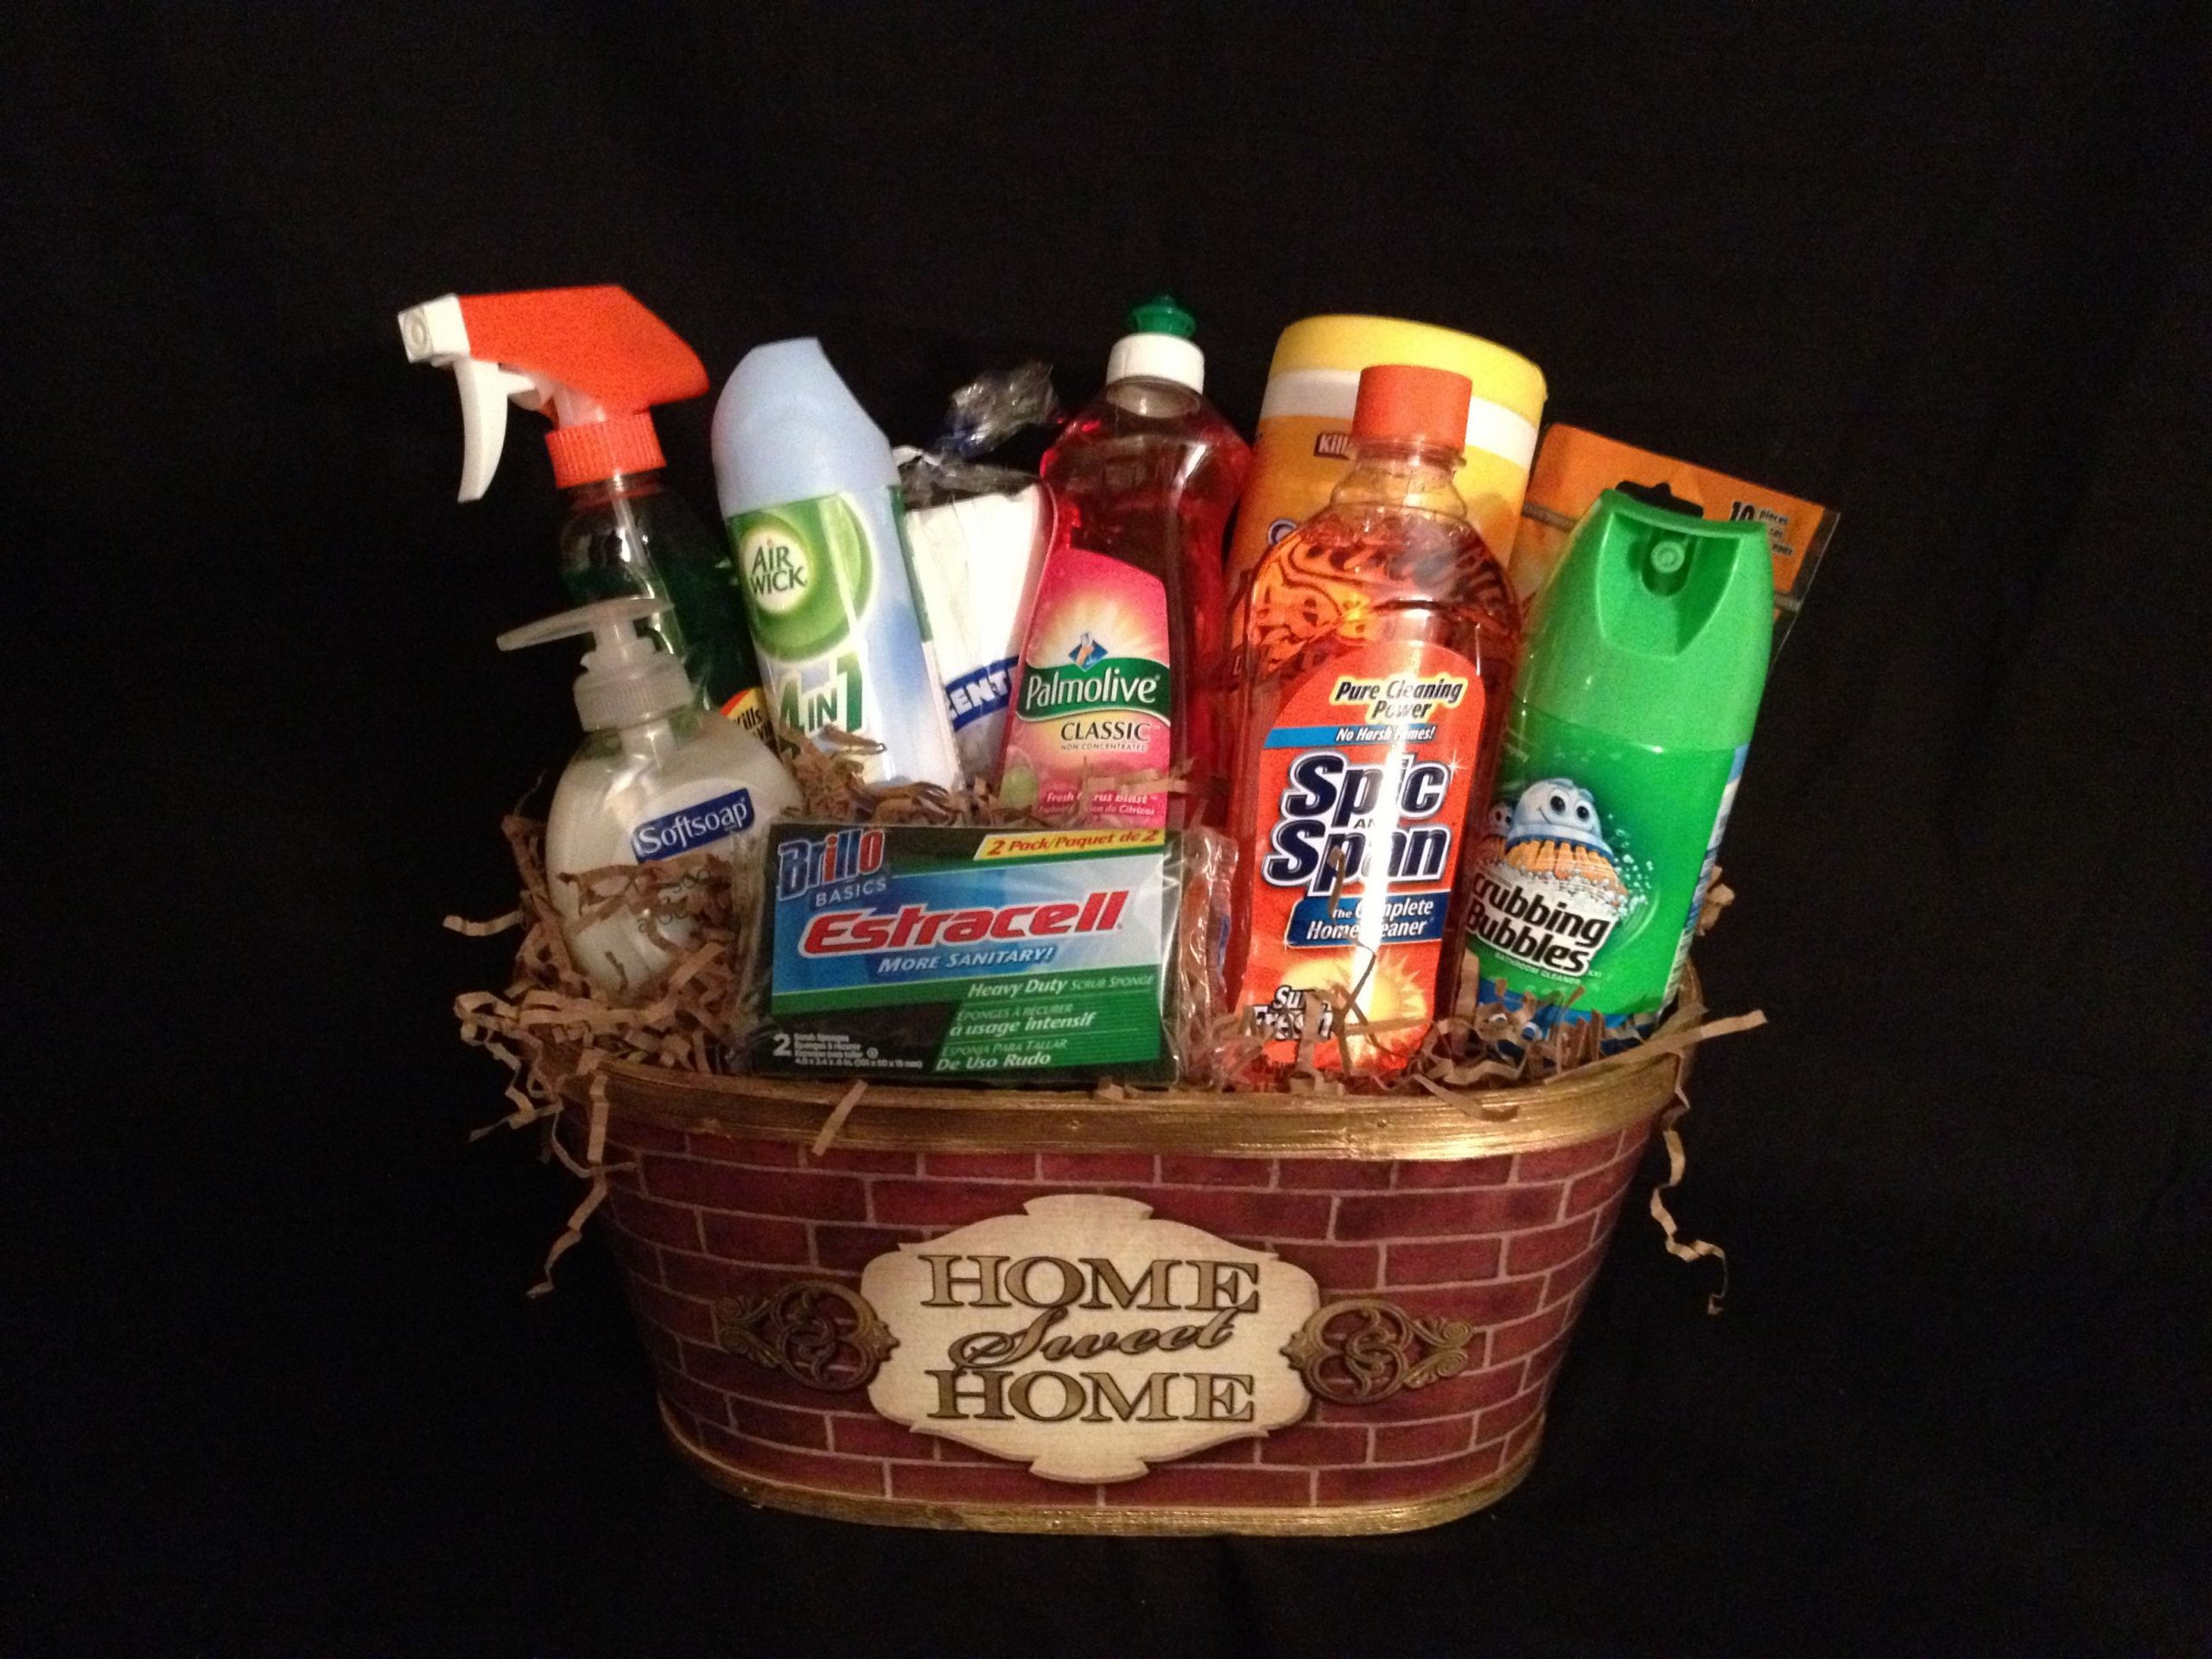 Household Gift Basket Ideas
 Home Sweet Home Basket This basket contains the essential